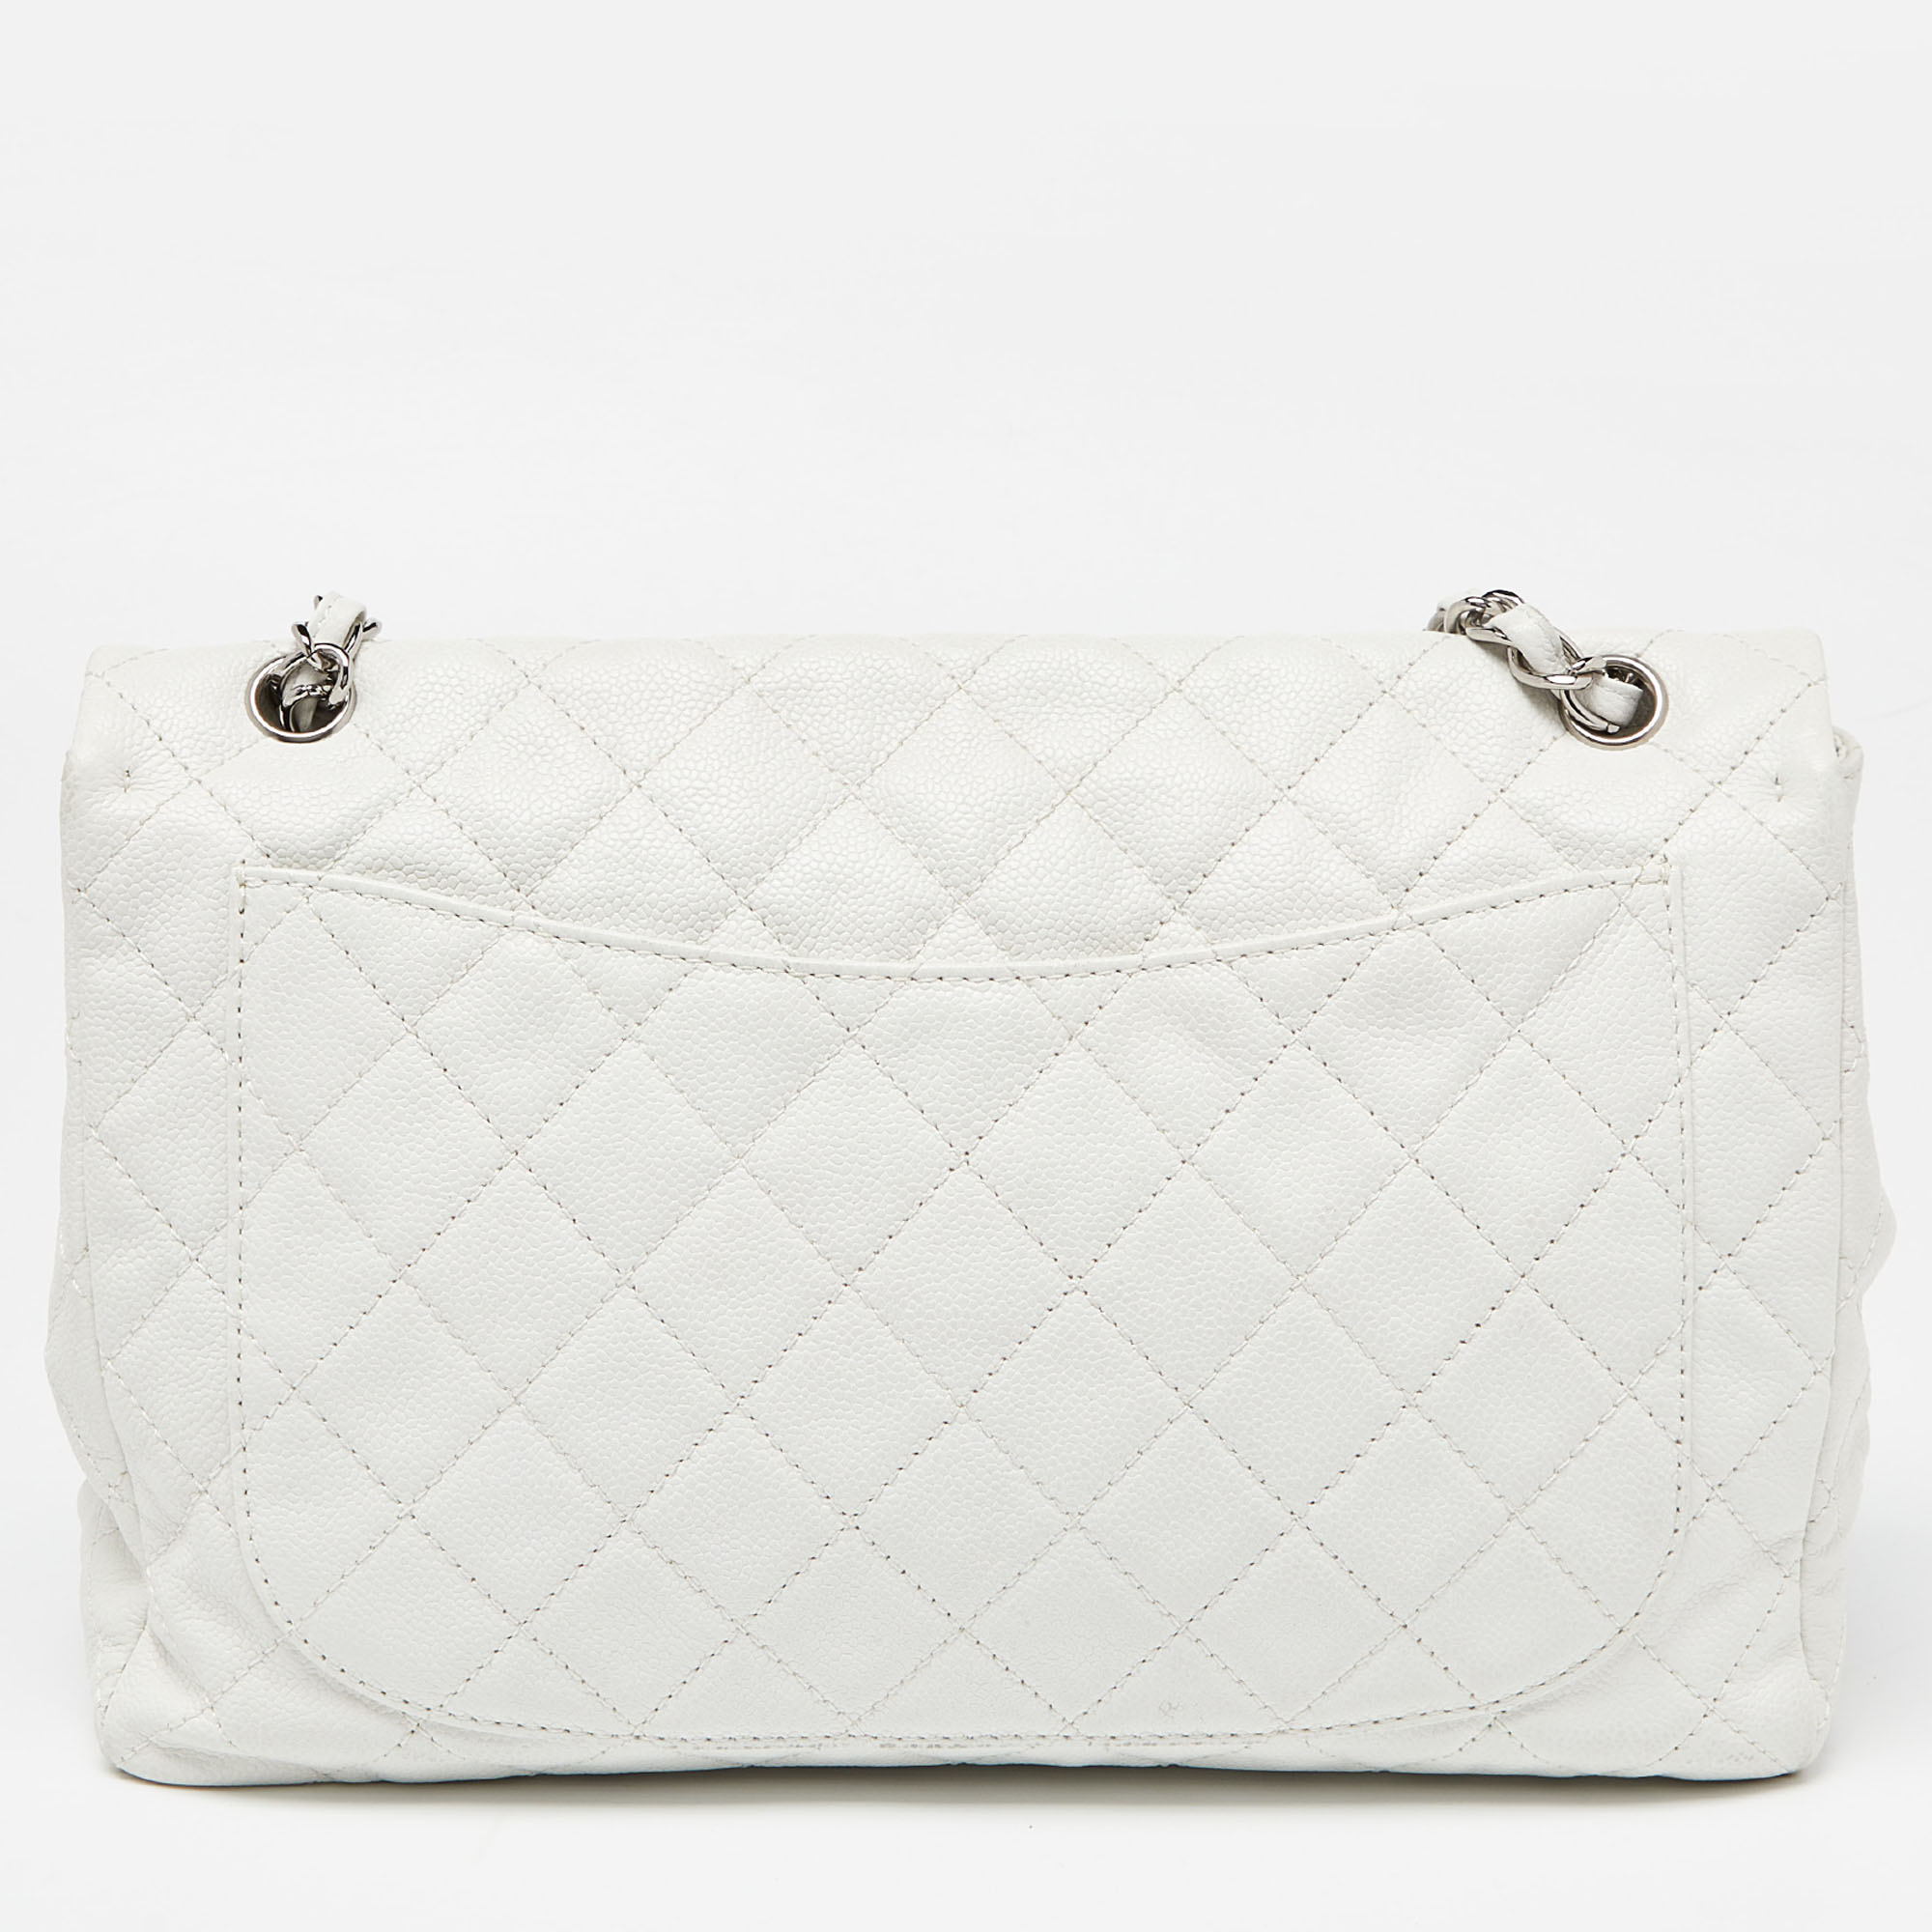 Chanel White Quilted Caviar Leather Maxi Vintage Classic Single Flap Bag